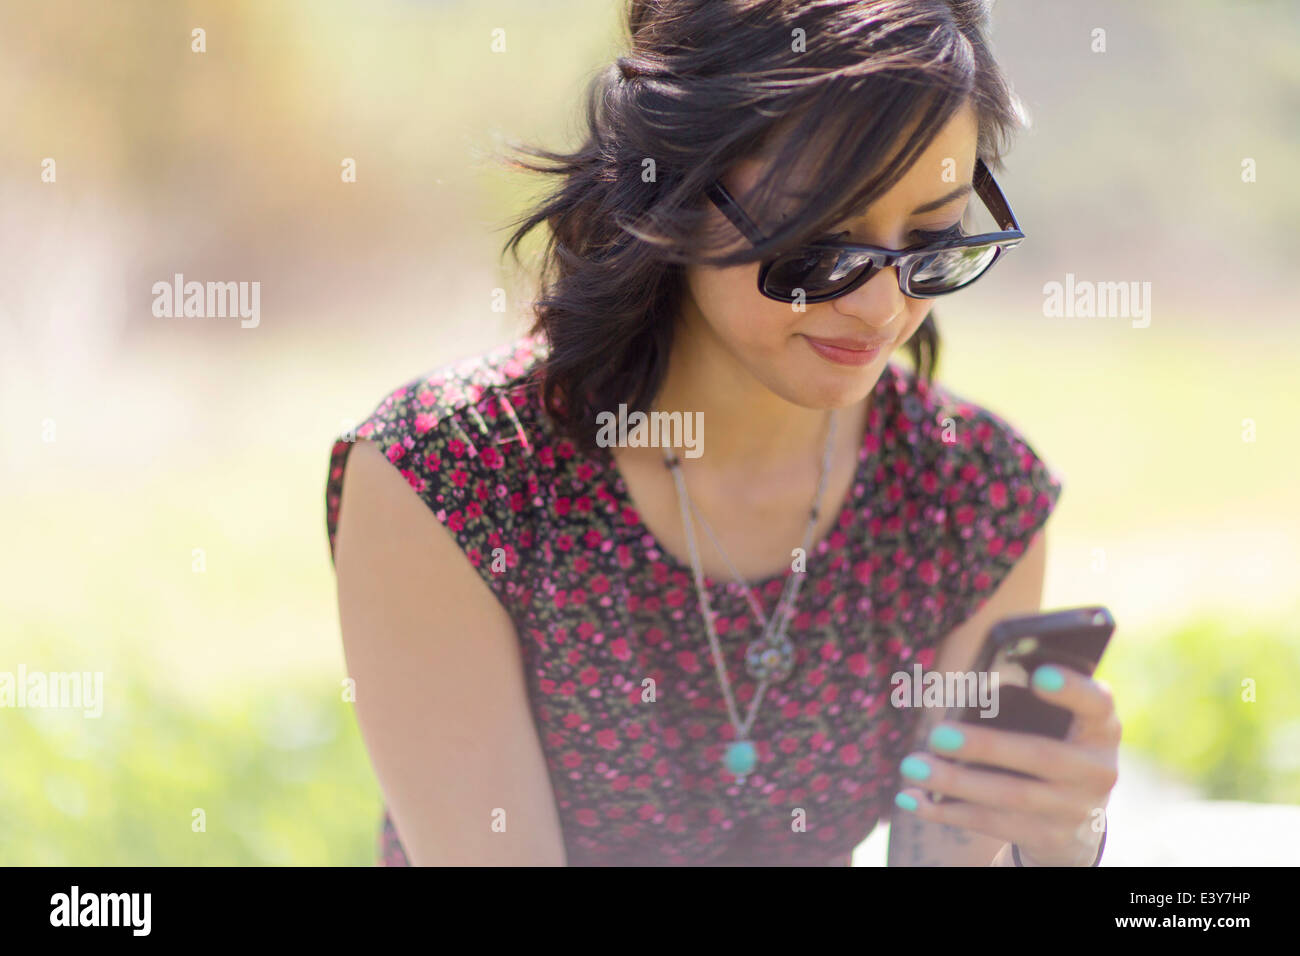 Young woman sitting in park with smartphone Banque D'Images